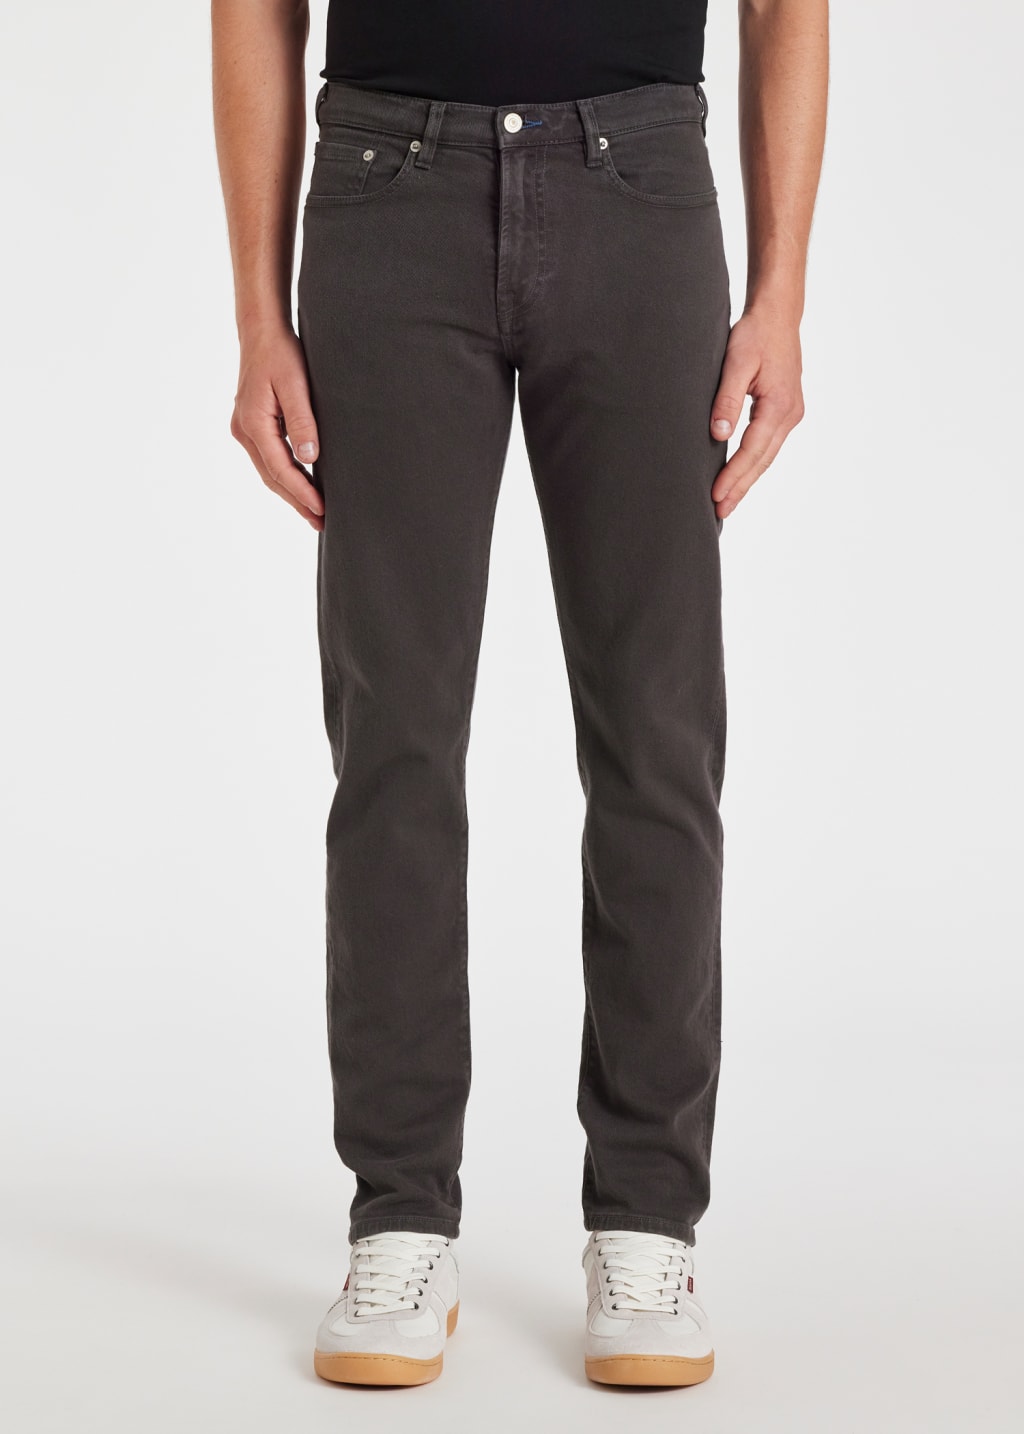 Model View - Tapered-Fit Dark Grey Garment-Dyed Jeans